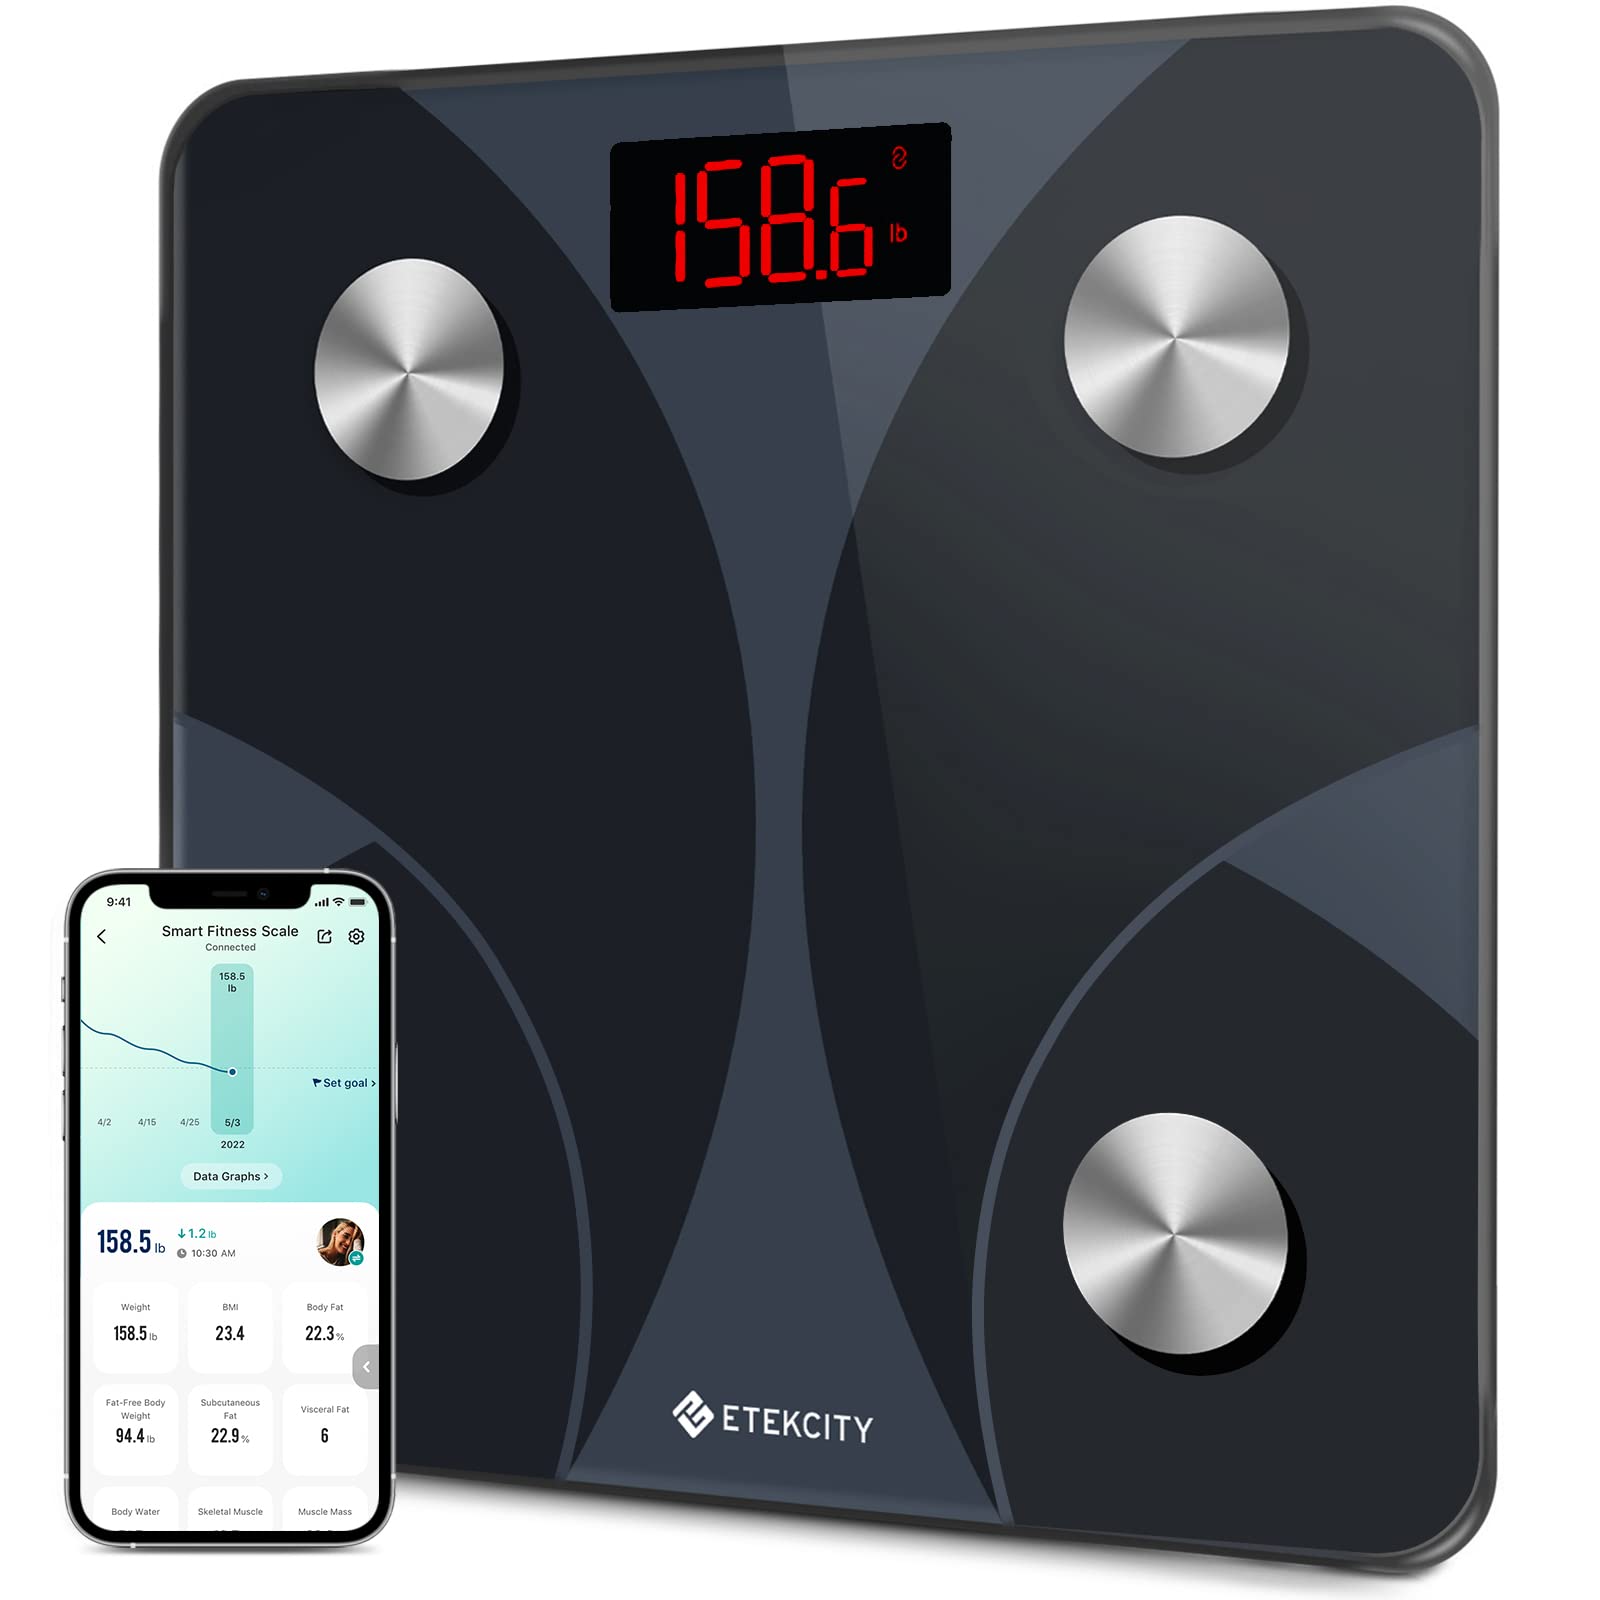 Etekcity Scale for Body Weight and Fat Percentage, Smart Digital Bathroom BMI Measurement, Accurate Bluetooth Weighing Machine, Body Composition Analyzer, 400lb